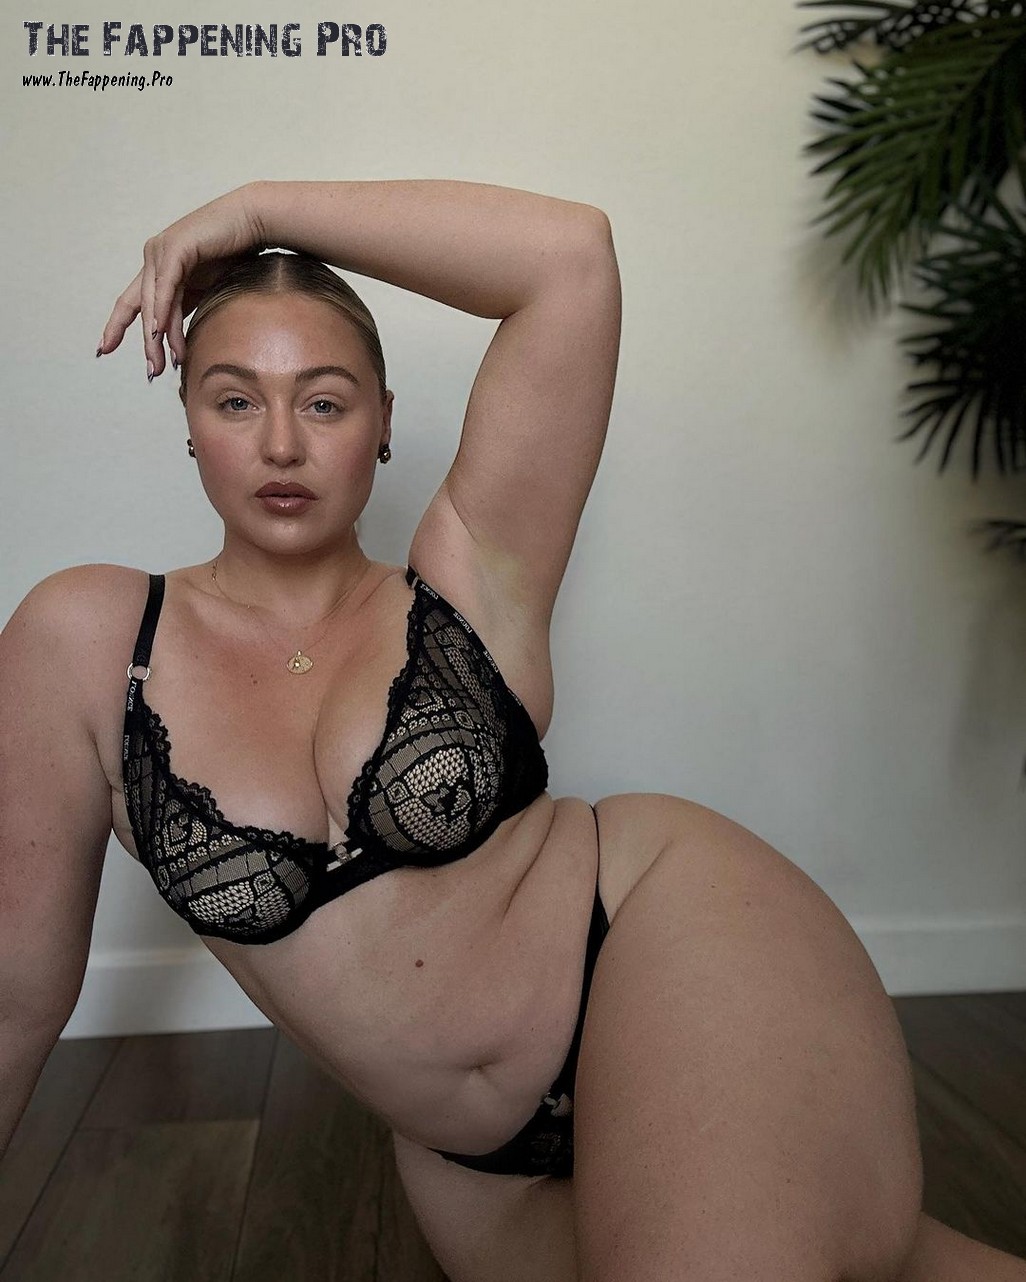 Discover the rising star Iskra Lawrence, with 3.5 million followers on Instagram, showcasing her stunning figure and confidence in black lingerie from Lounge Underwear. Unlike others in the industry, Iskra embraces her curves and beauty without compromising her authenticity. Dive into her world of bold poses and captivating photos that will leave you in awe.